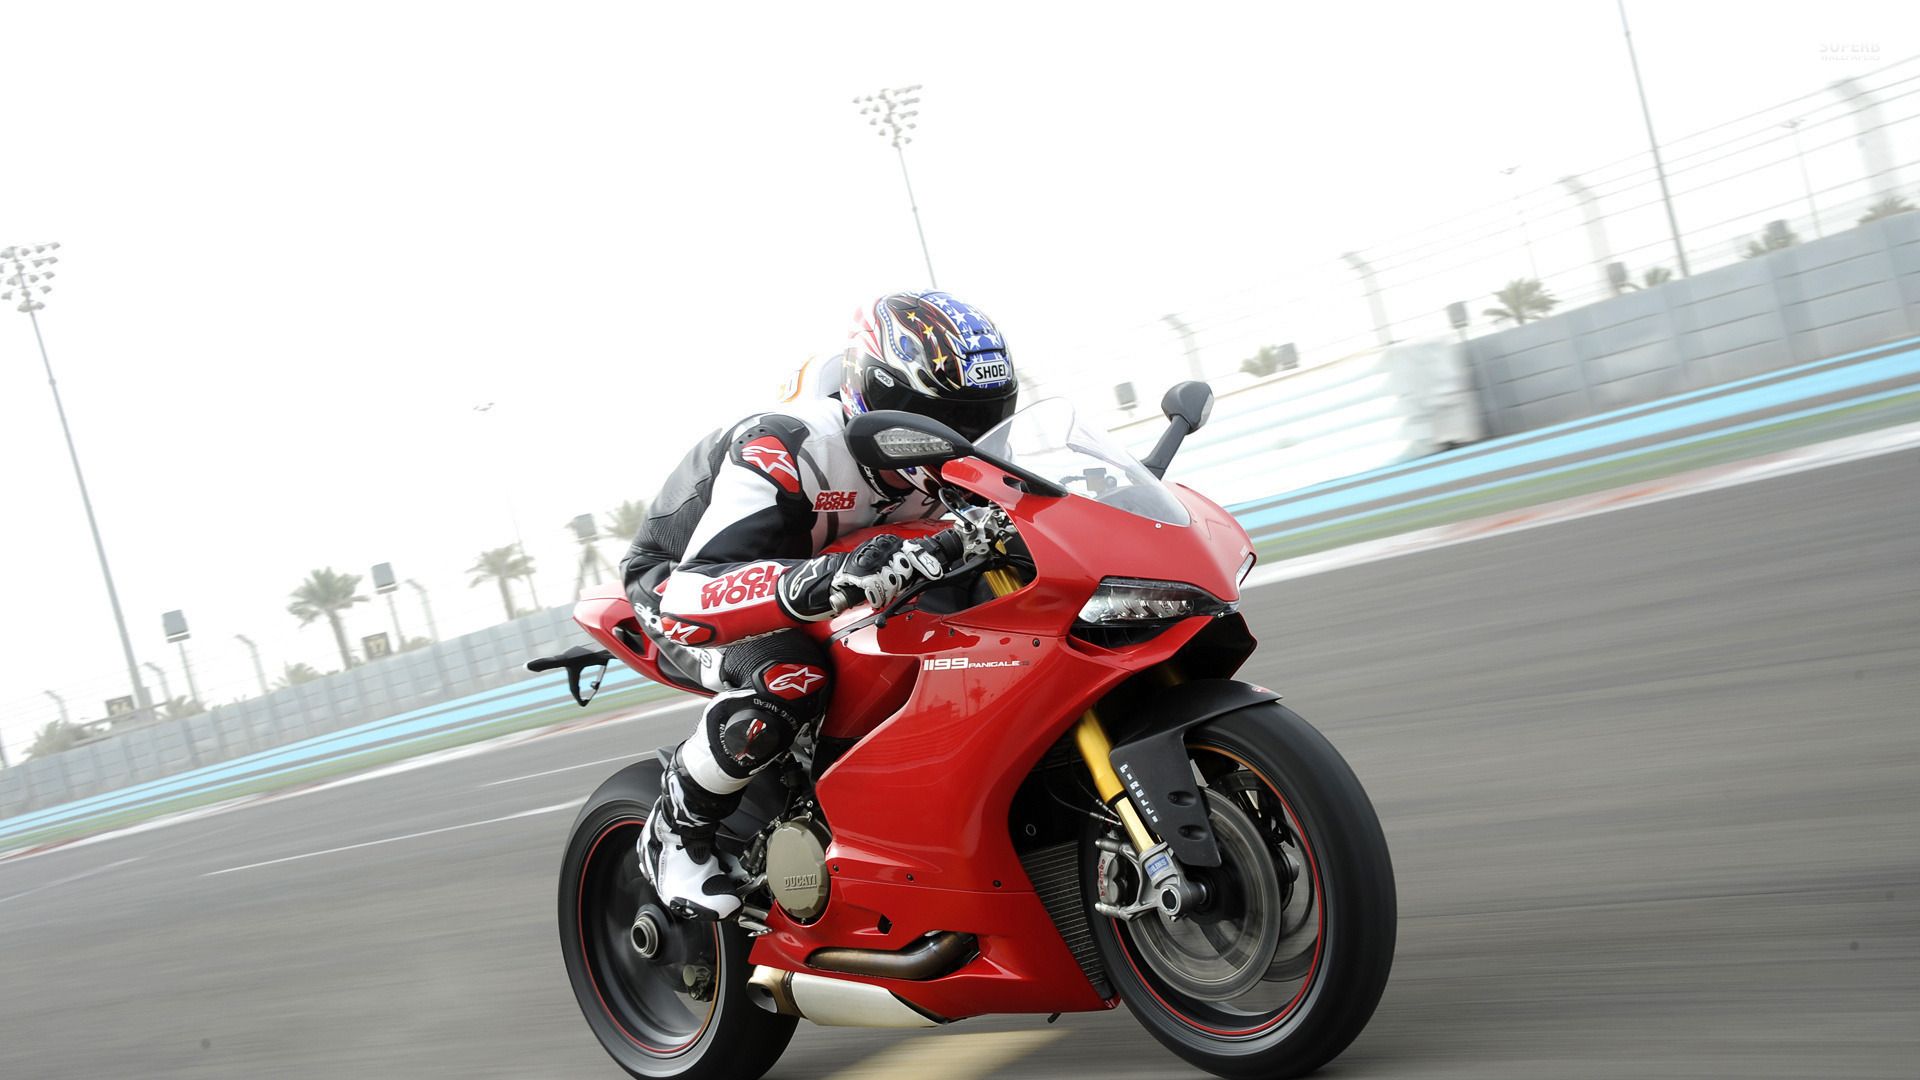 2015-red-ducati-1199-panigale-side-view-47729-1920x1080.jpg